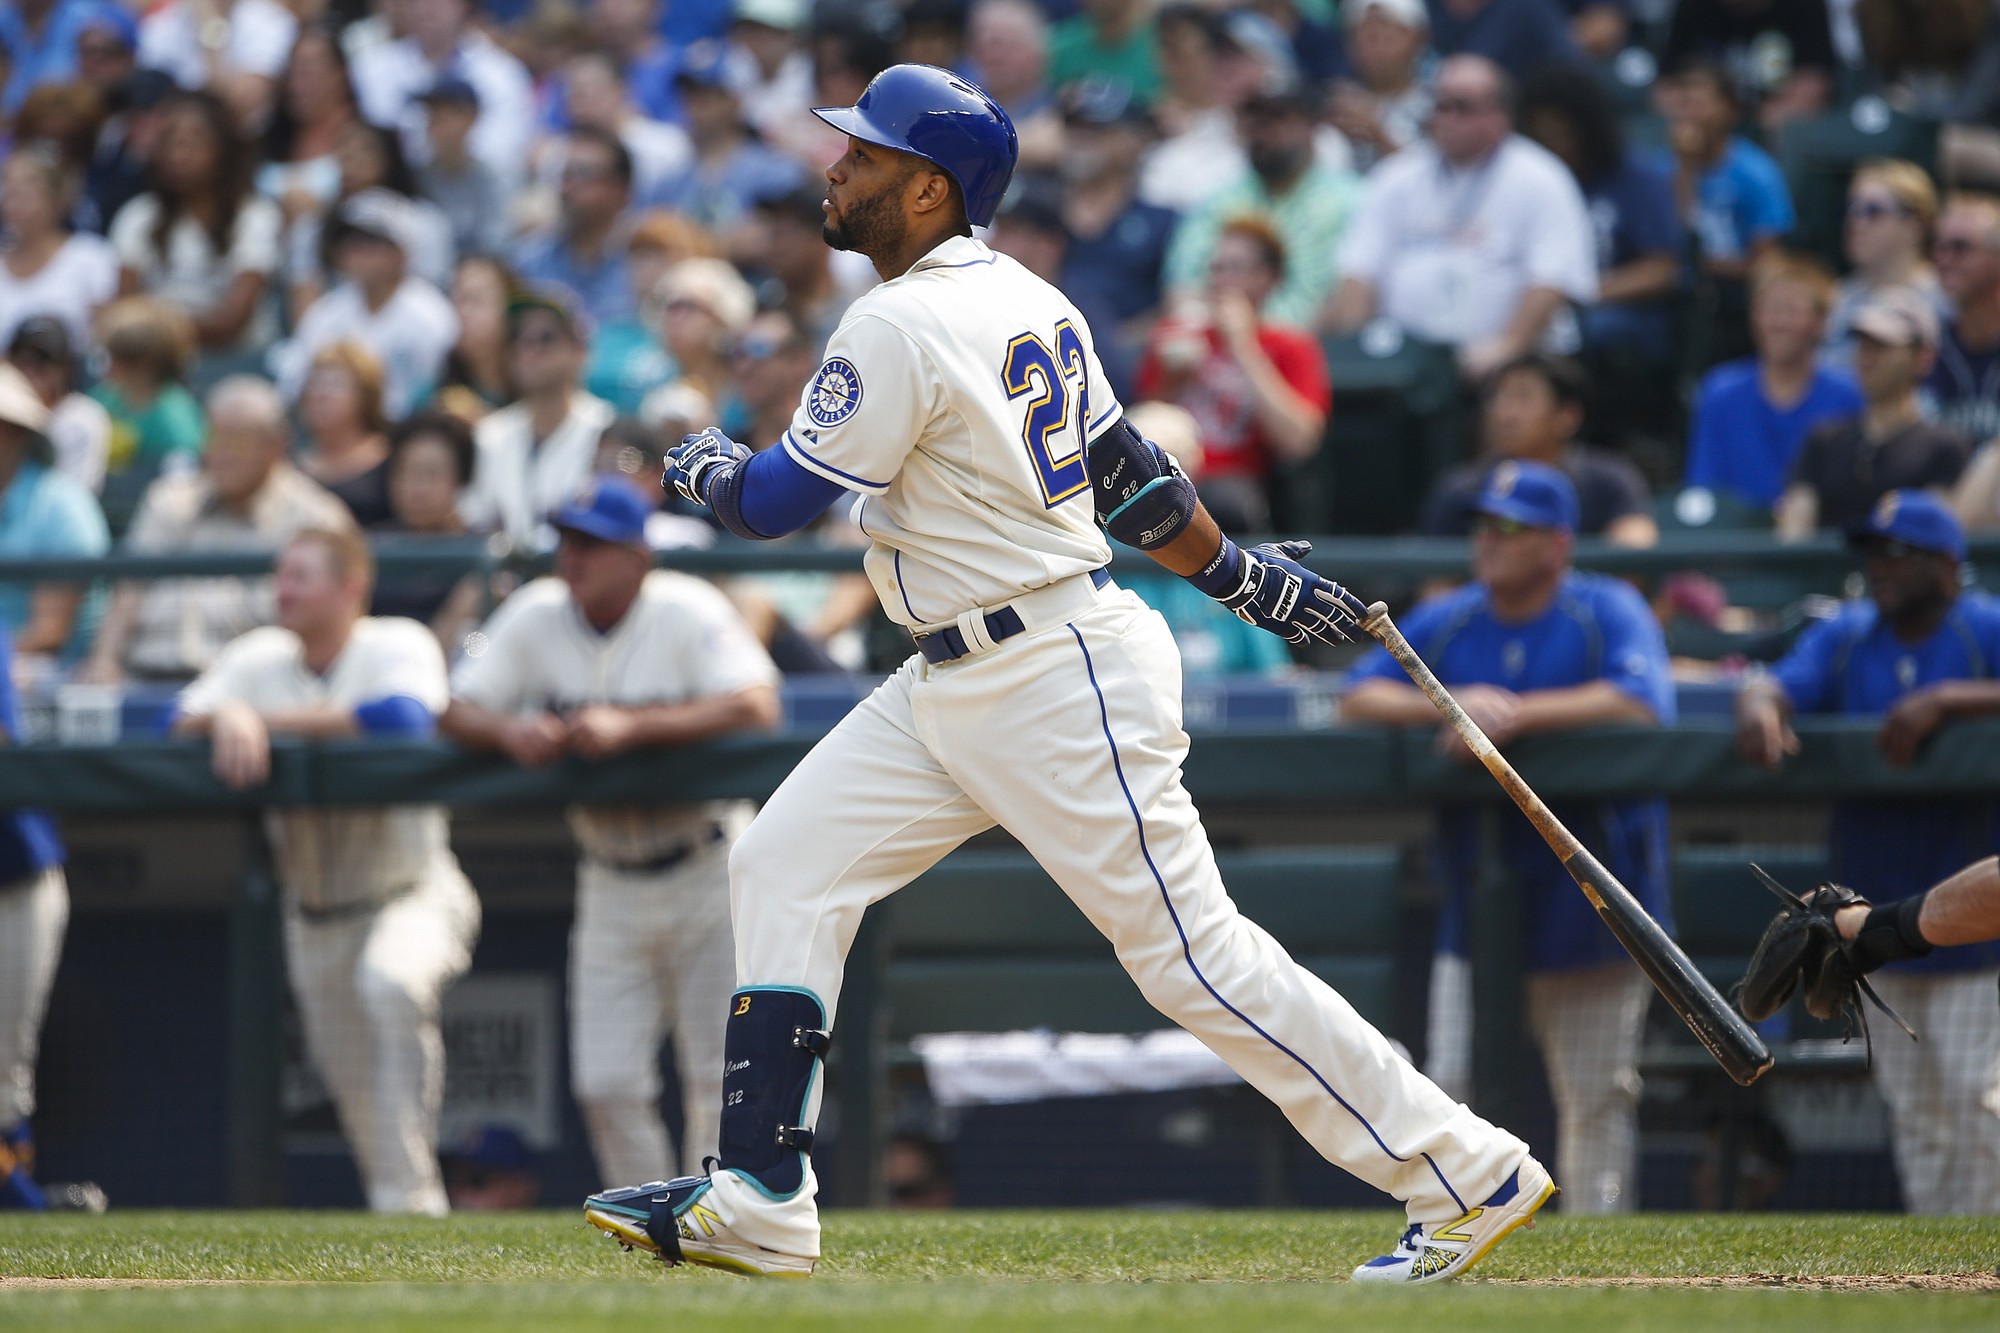 Seattle Mariners' Robinson Cano hits a two-run home run against the Chicago White Sox during the fifth inning Sunday, Aug. 23, 2015, in Seattle. Seattle defeated Chicago, 8-6.